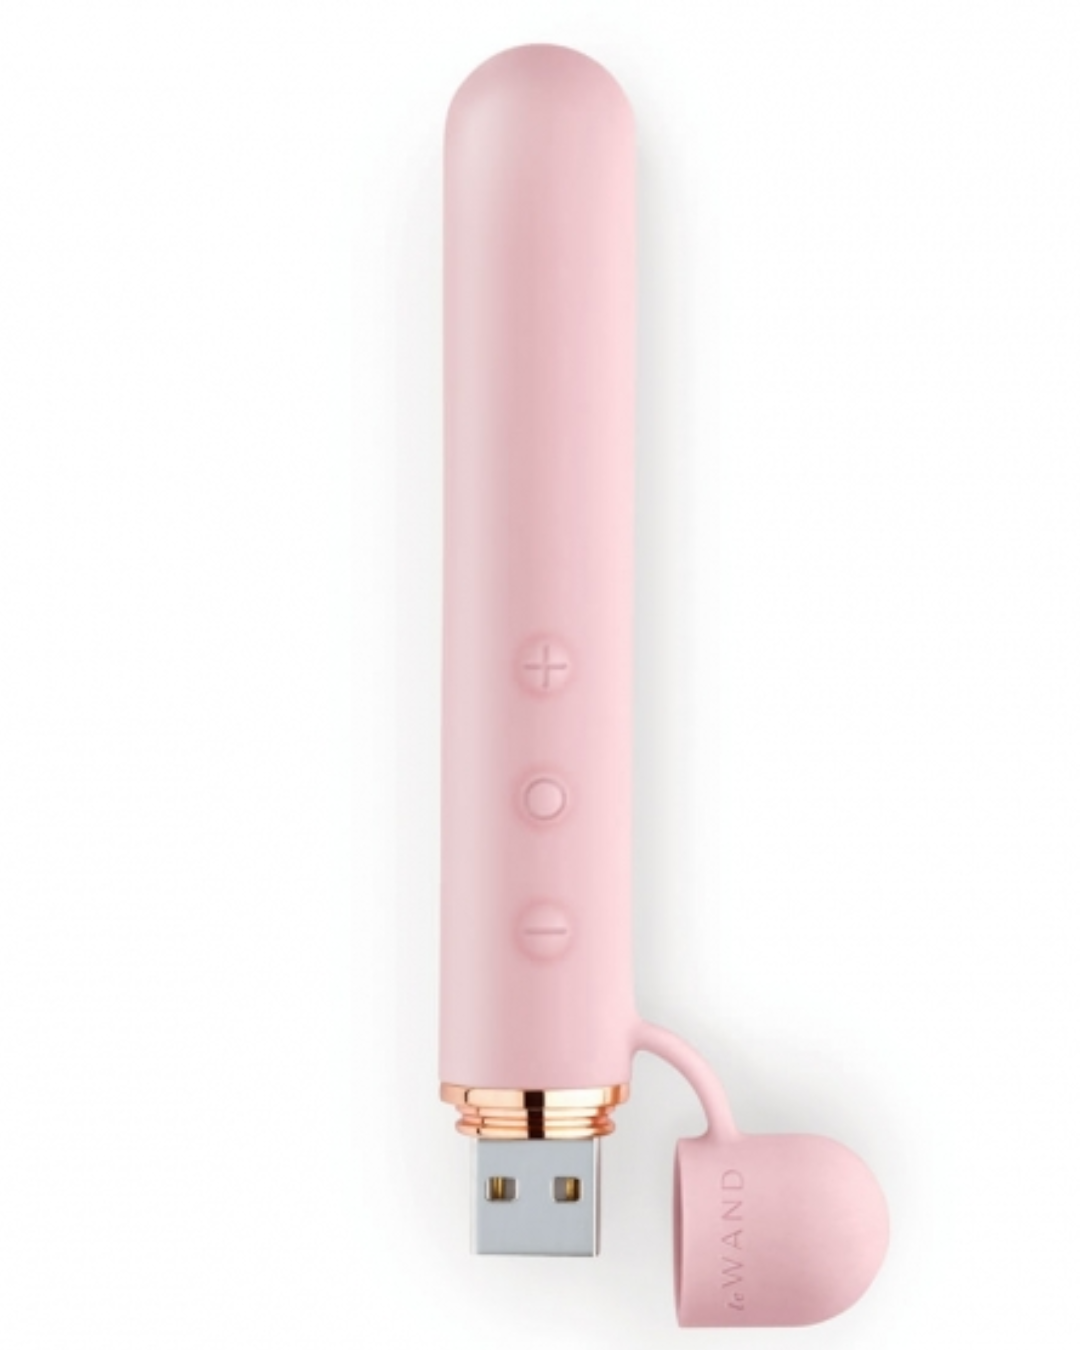 Le Wand Baton Slim Rechargeable Waterproof Vibrator - Rose Gold WITH CHARGING CAP OFF